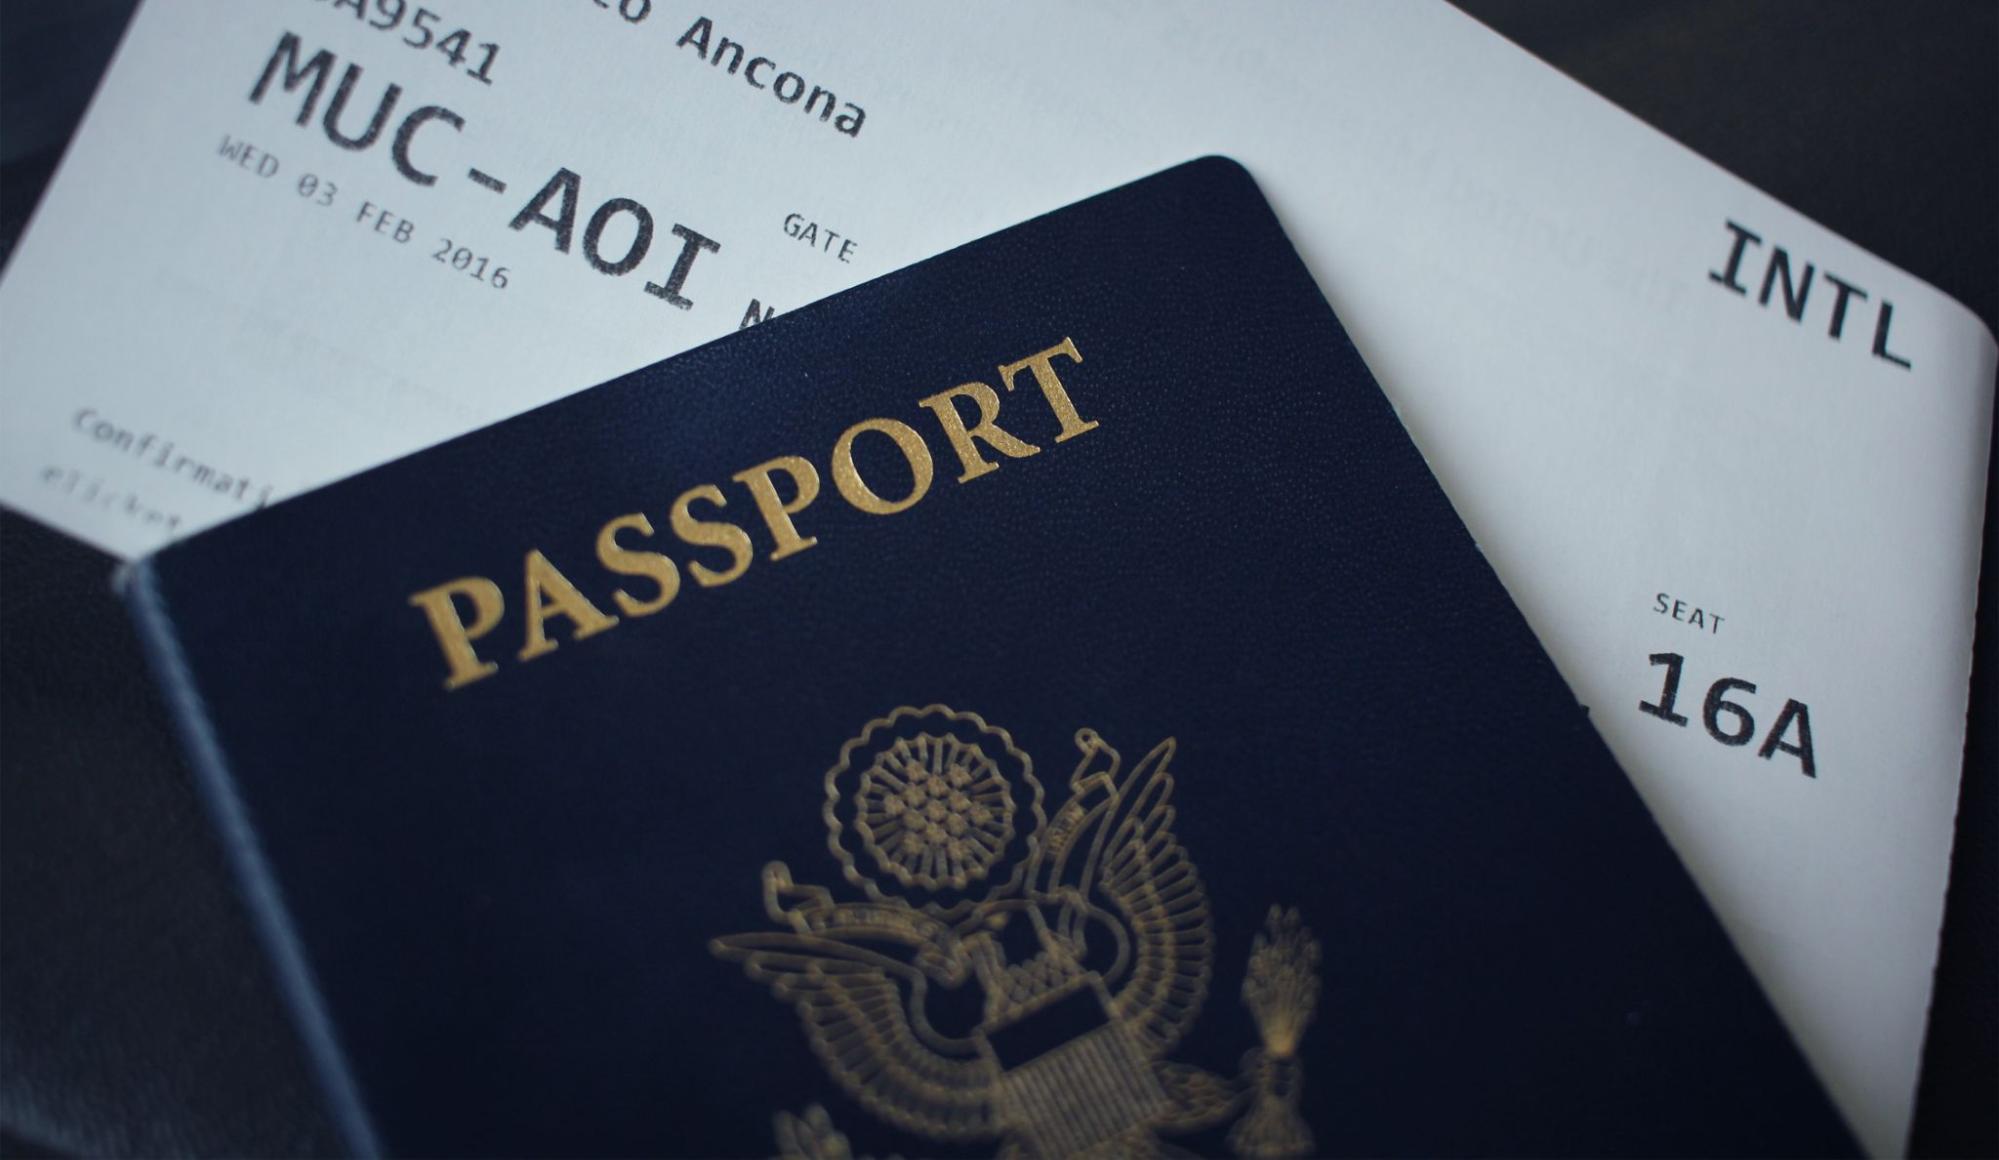 Non-guided Group Travel - visa and passport regulations